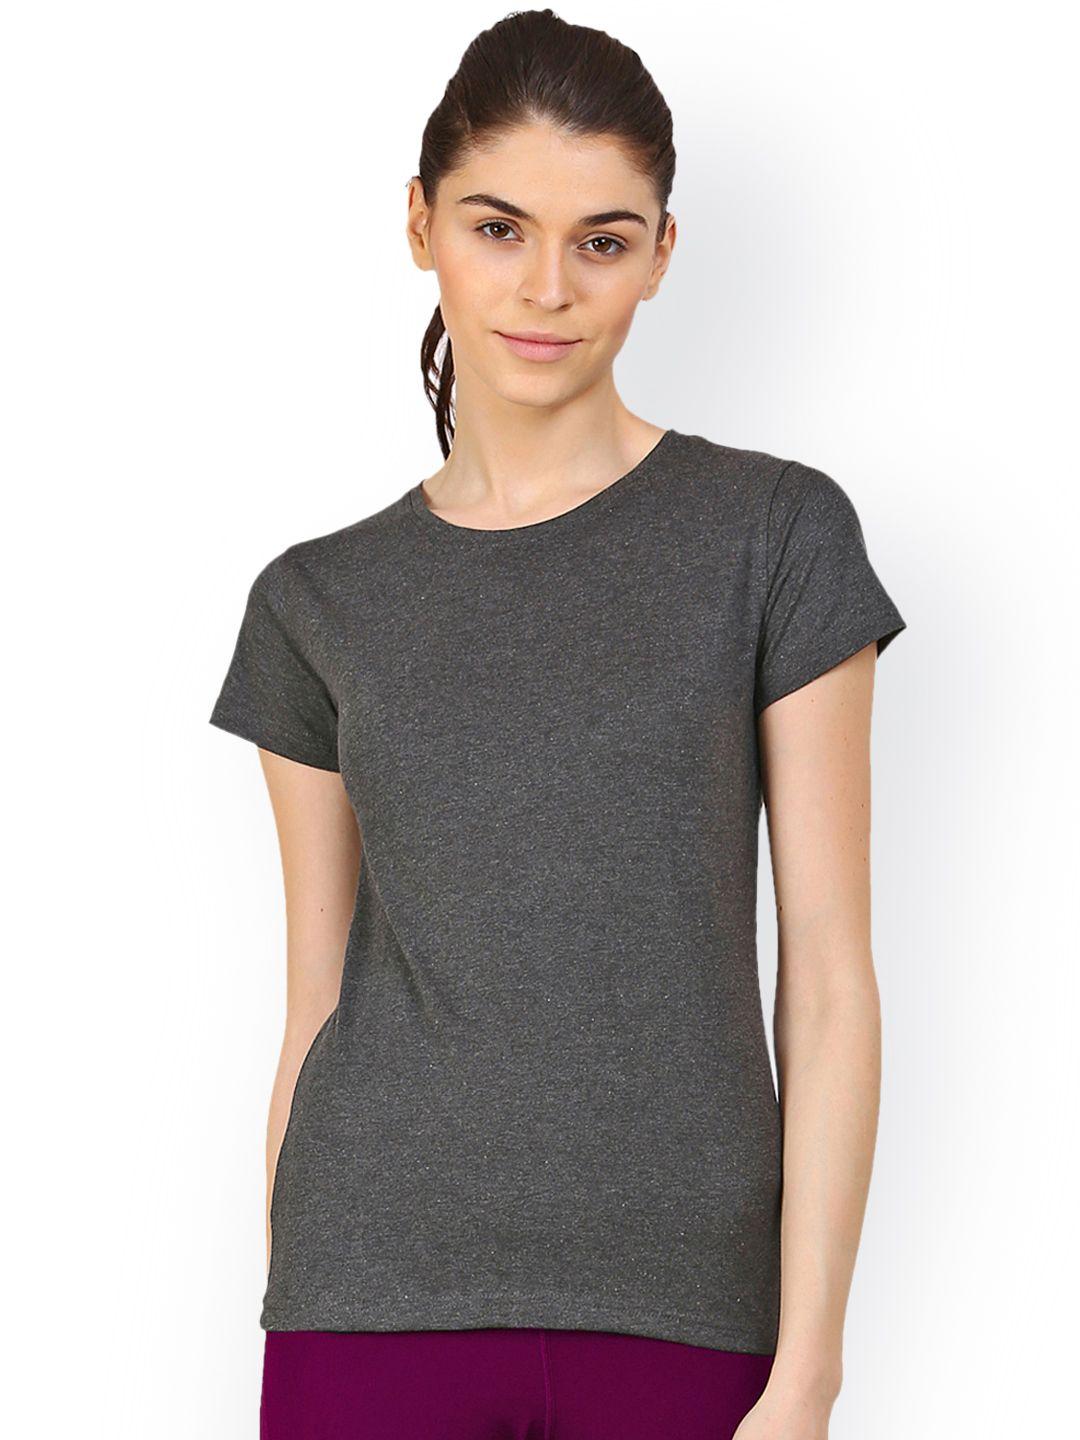 appulse-women-charcoal-solid-round-neck-t-shirt